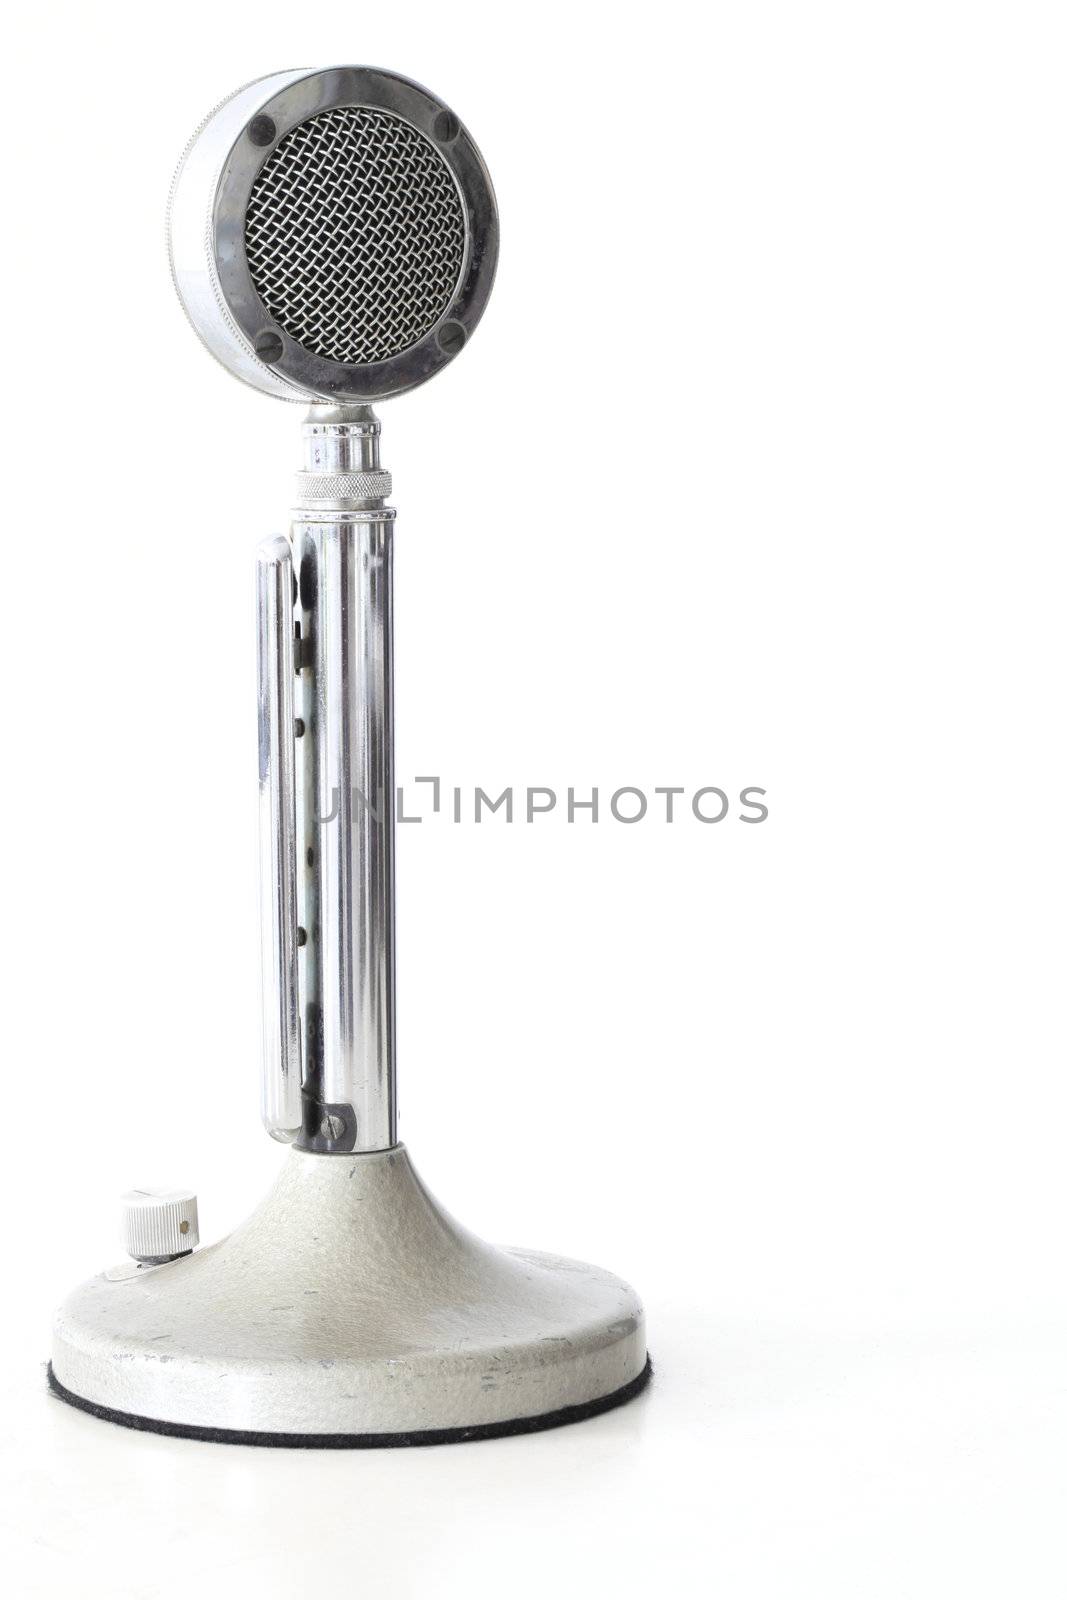 retro Microphone on white table with its reflection